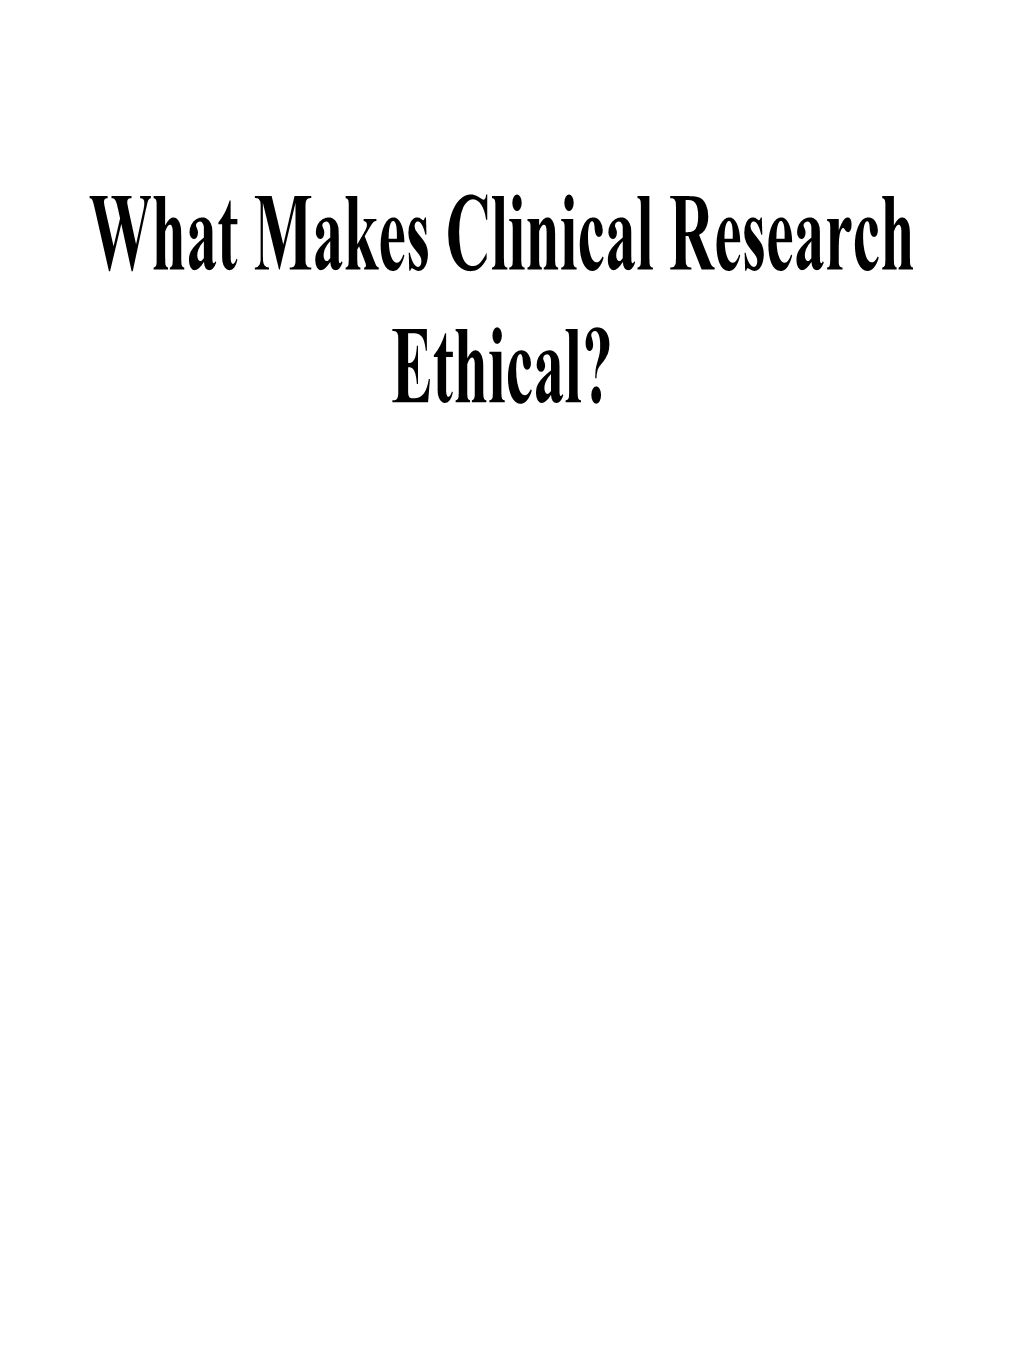 What Makes Clinical Research Ethical? Answers